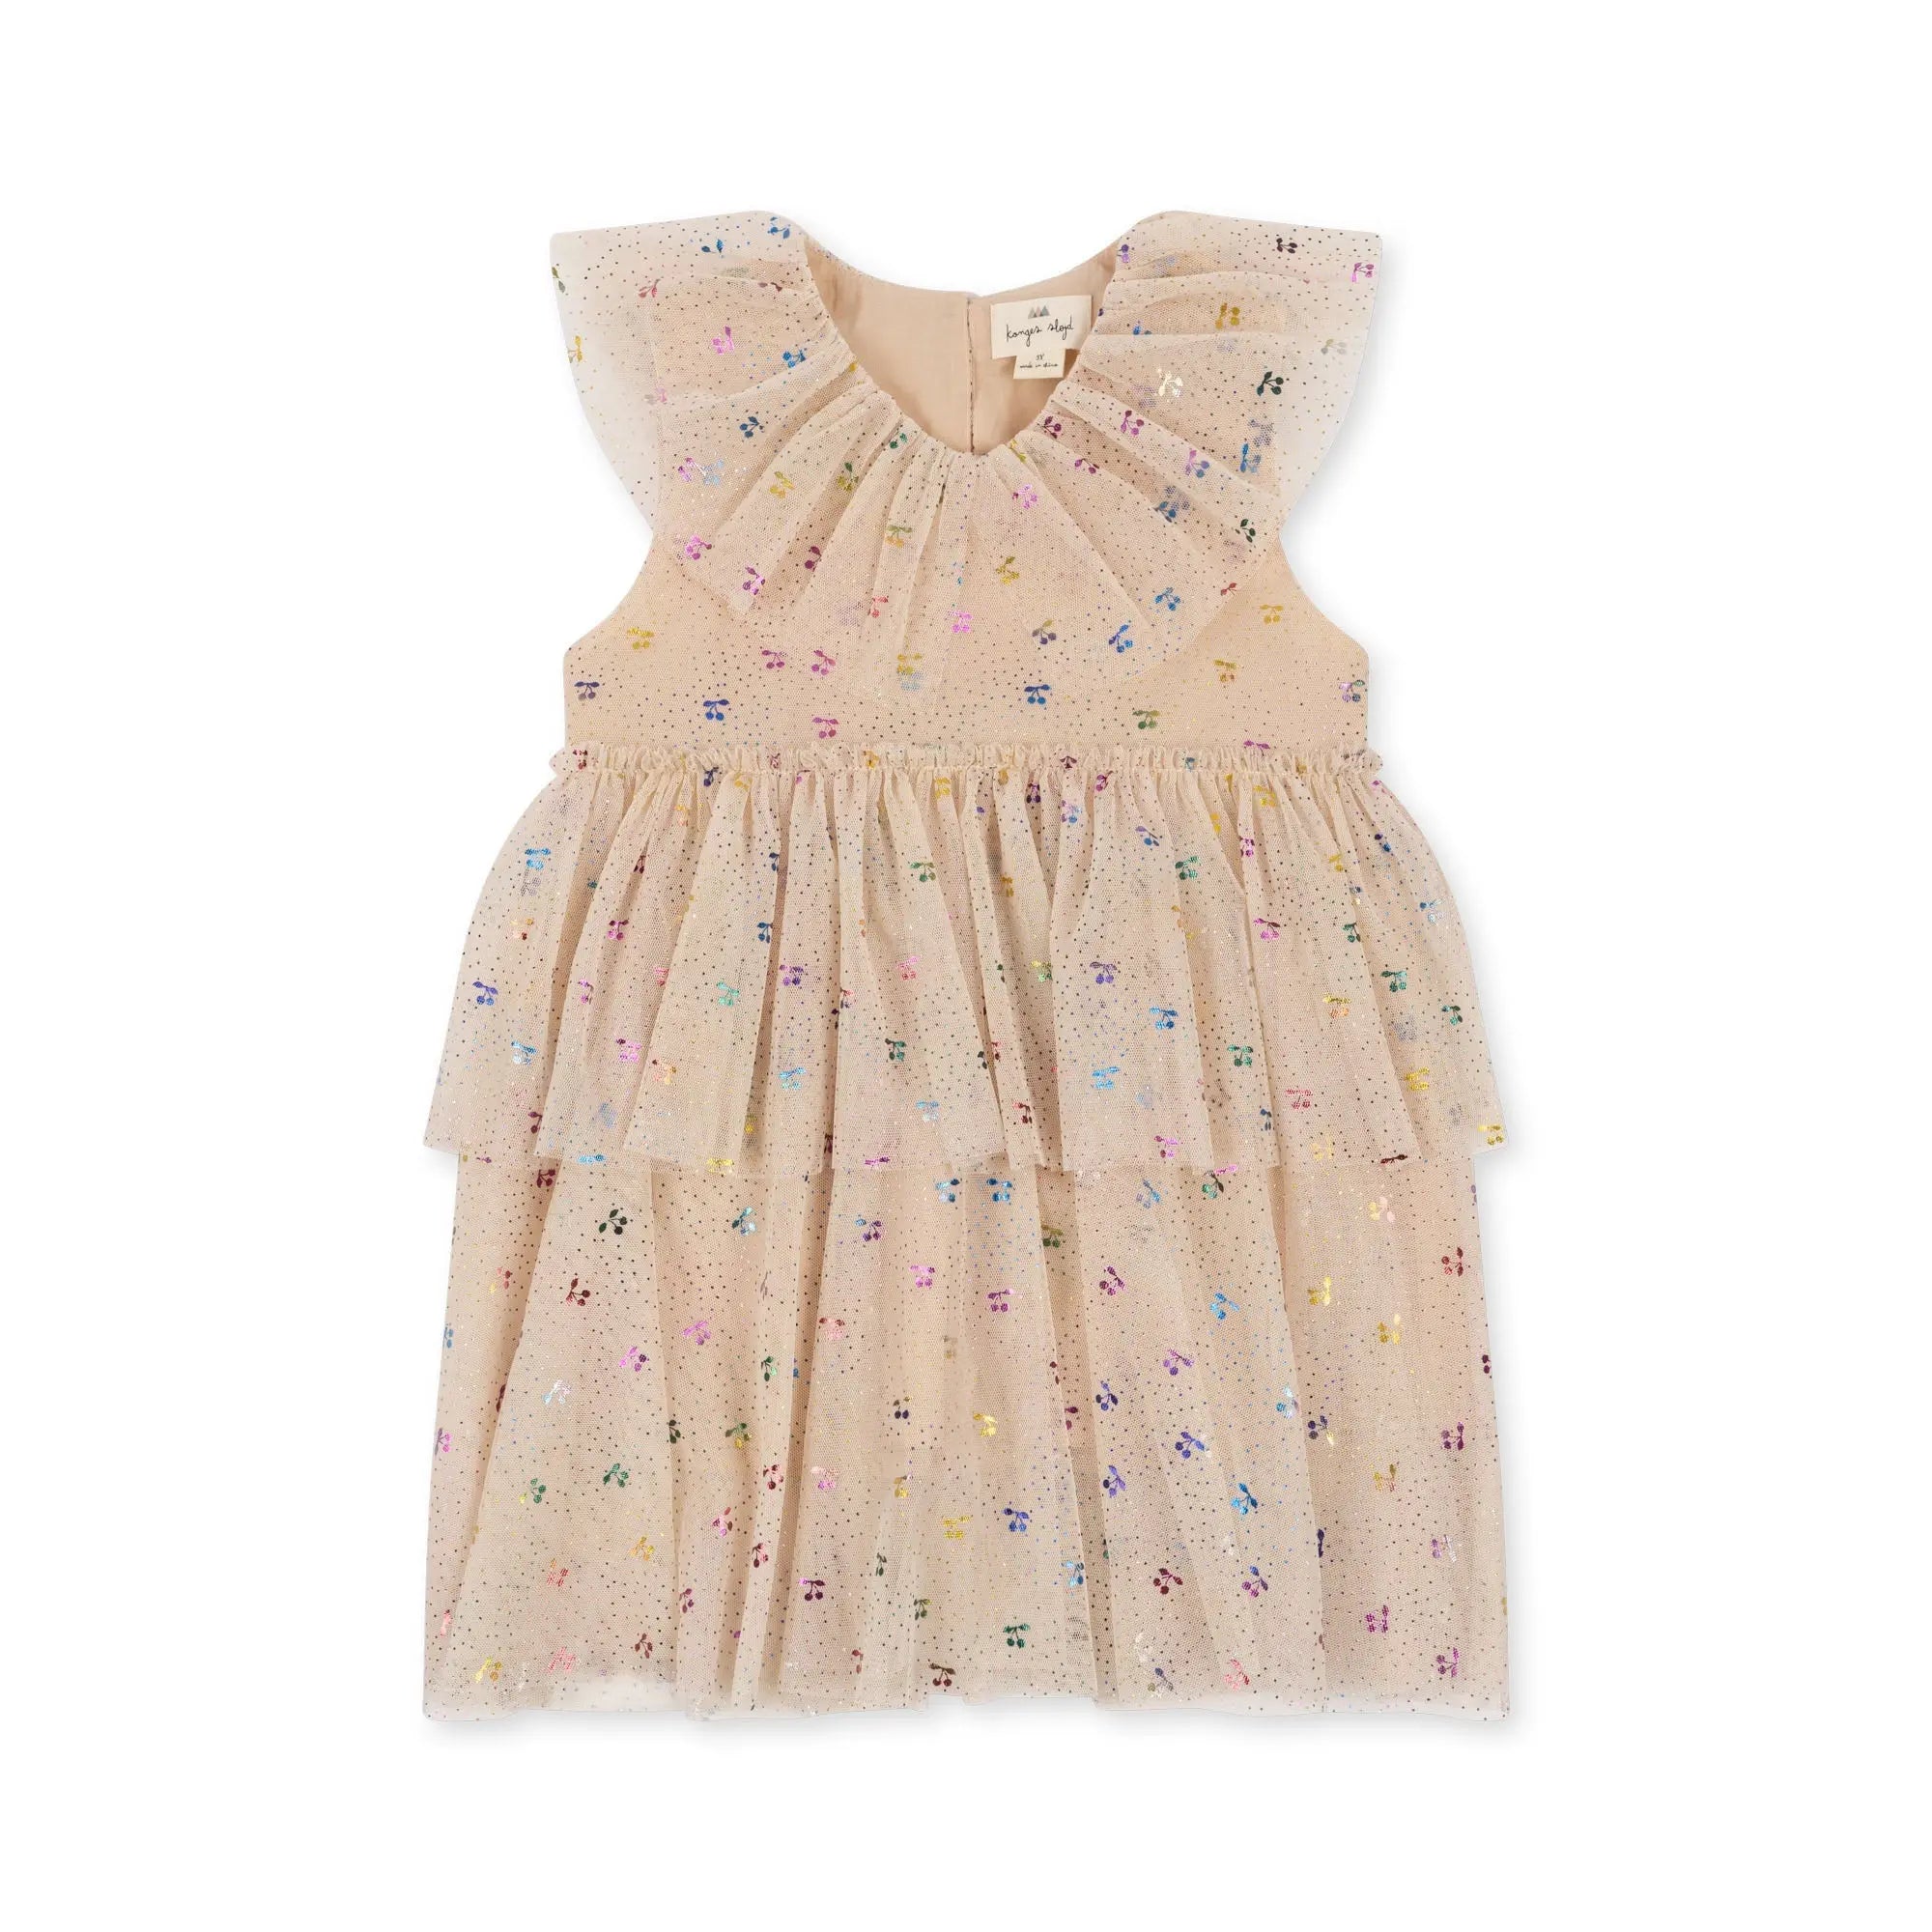 Fairy Dress With Frill Details, Two-Tier, Rounded Collar, Soft Cotton Inside Layer, Crisp Tulle Outer Layers  Konges Sløjd Fairy Cherry 86cm/18M 